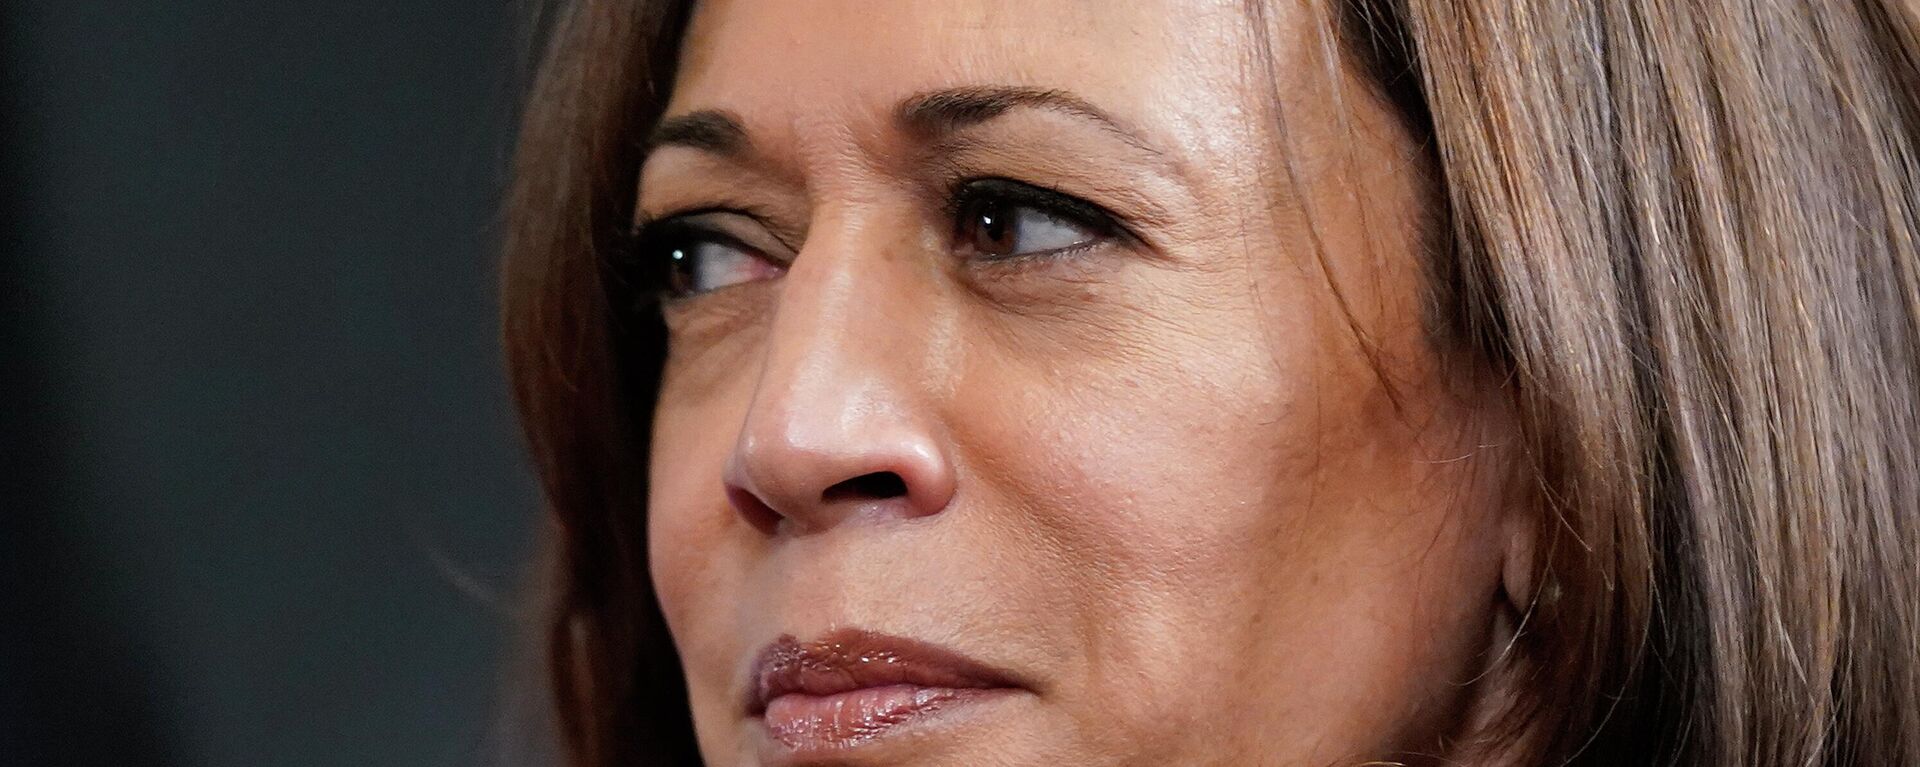 Vice President Kamala Harris meets with Tanzanian President Samia Suluhu Hassan in Harris' ceremonial office in the Eisenhower Executive Office Building on the White House campus, Friday, April 15, 2022, in Washington. (AP Photo/Patrick Semansky) - Sputnik International, 1920, 21.04.2022